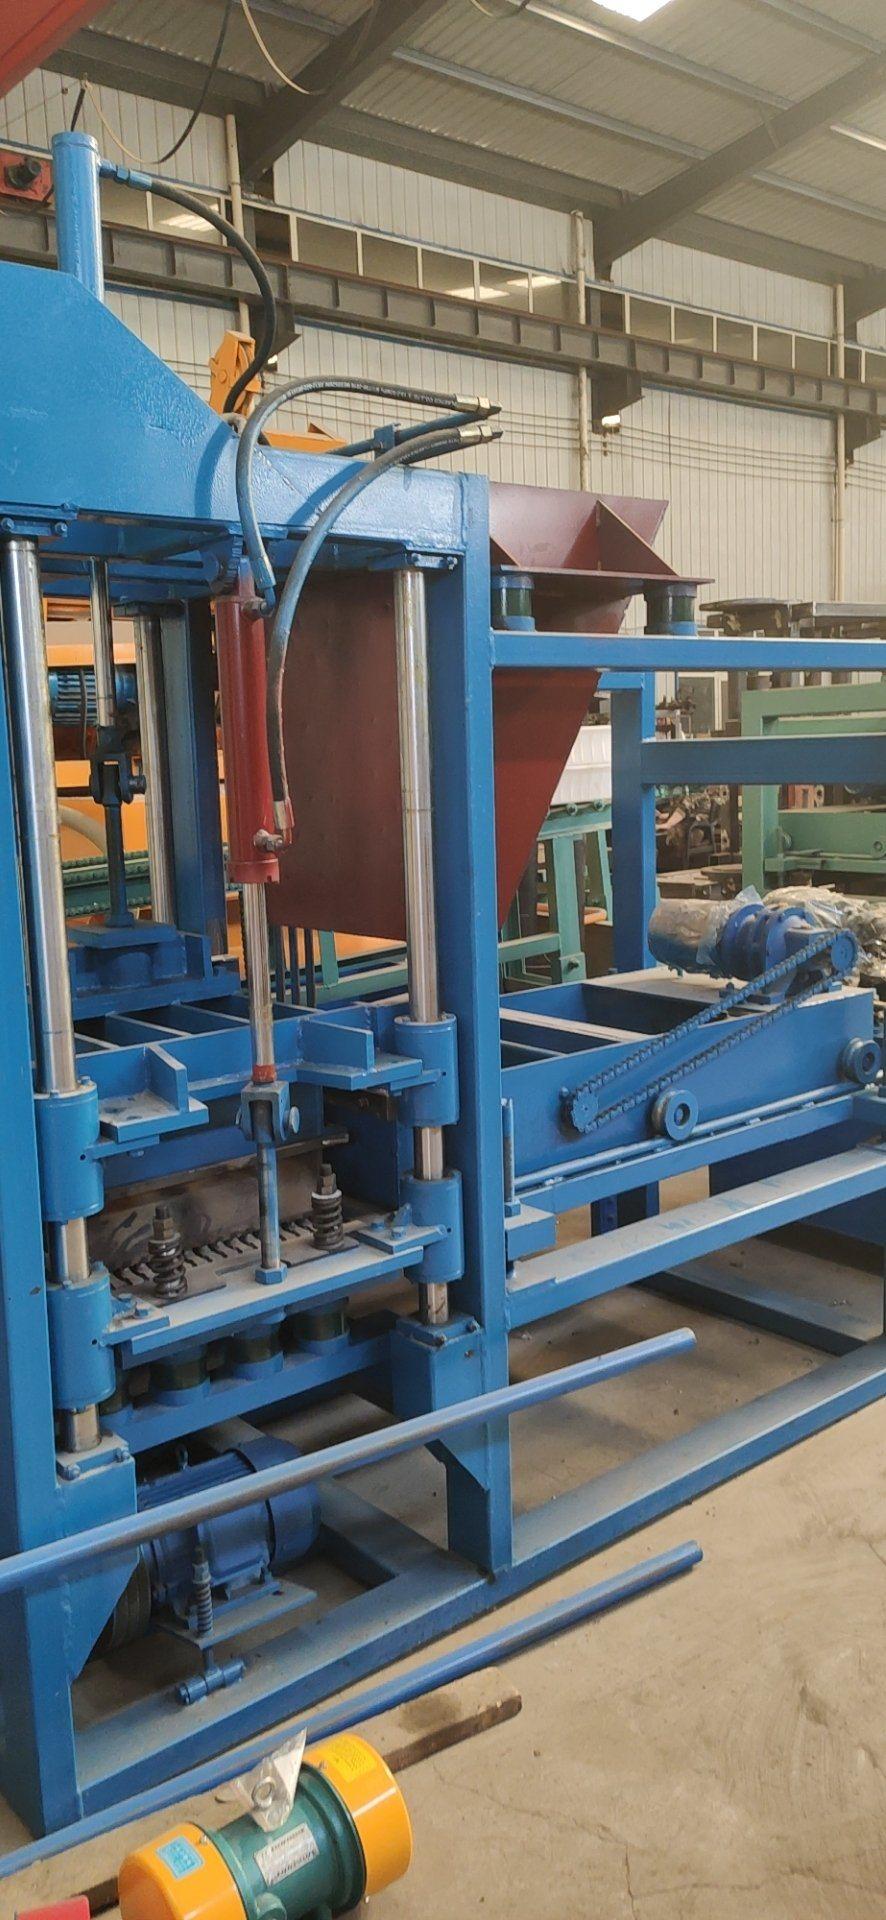 Our Price Is Always The Most Suitable for The Market Various Brick Making Machine